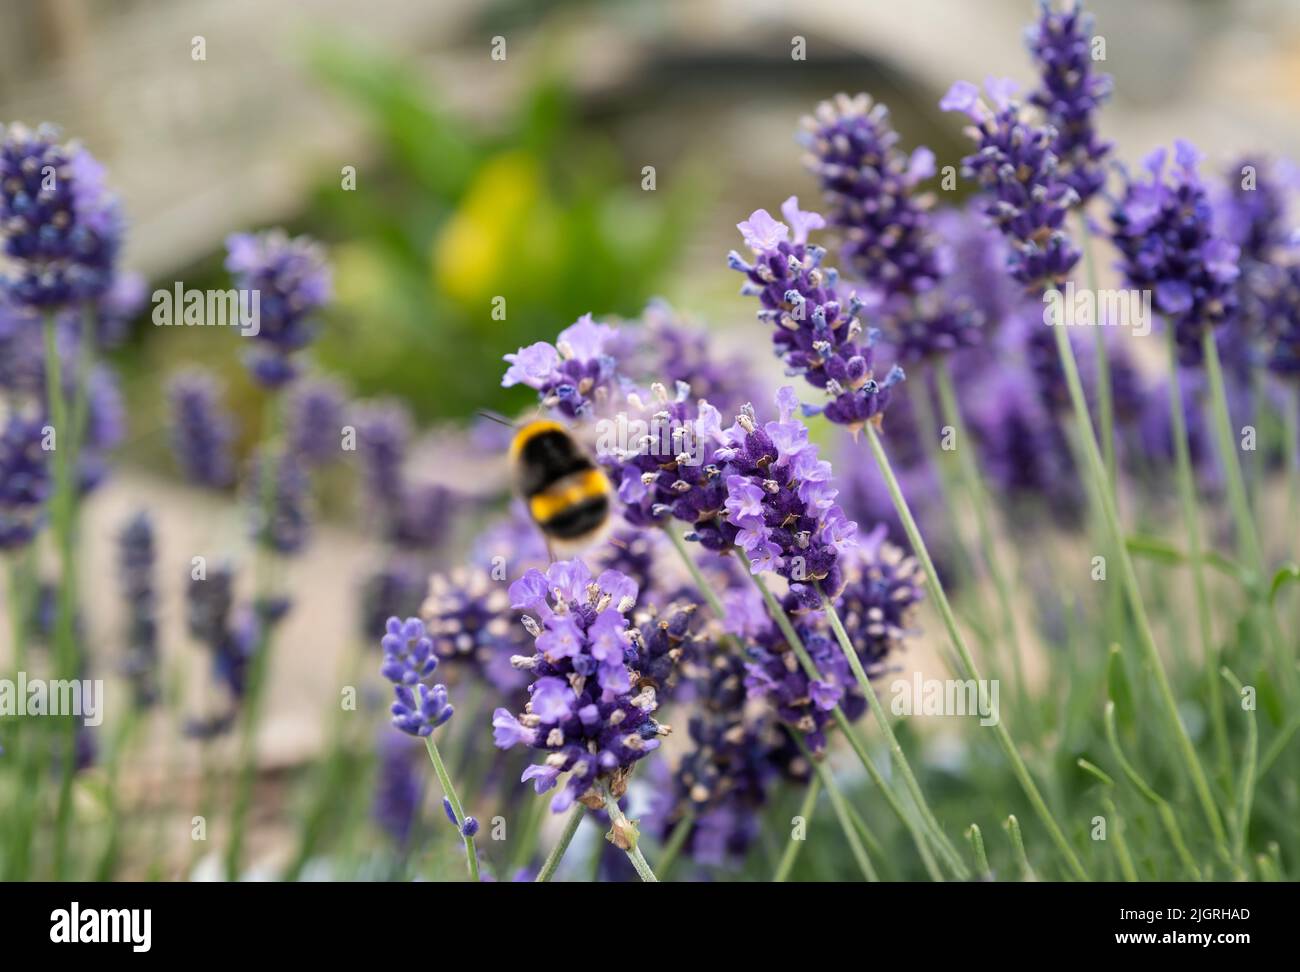 Pretty lavender flowers growing in front of a defocused garden pond and lily. A beautiful soft focus bumble bee is moving around the flowers. Stock Photo